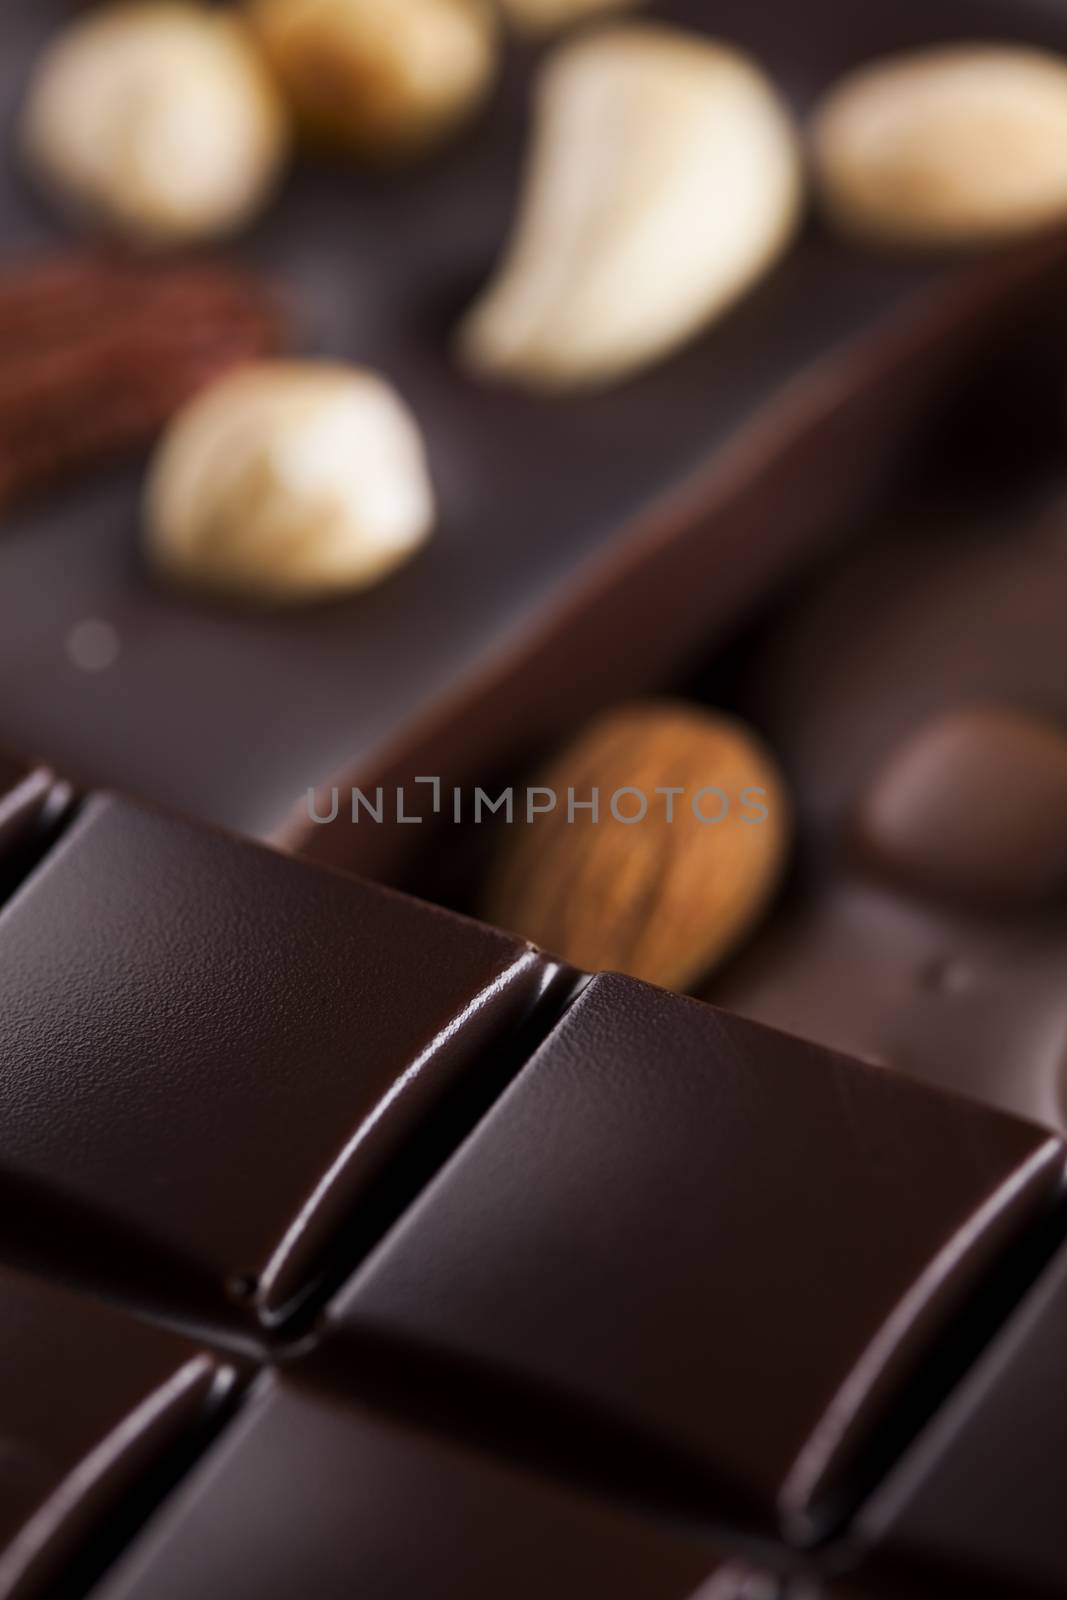 Dark homemade chocolate bars and cocoa pod on wooden  by JanPietruszka